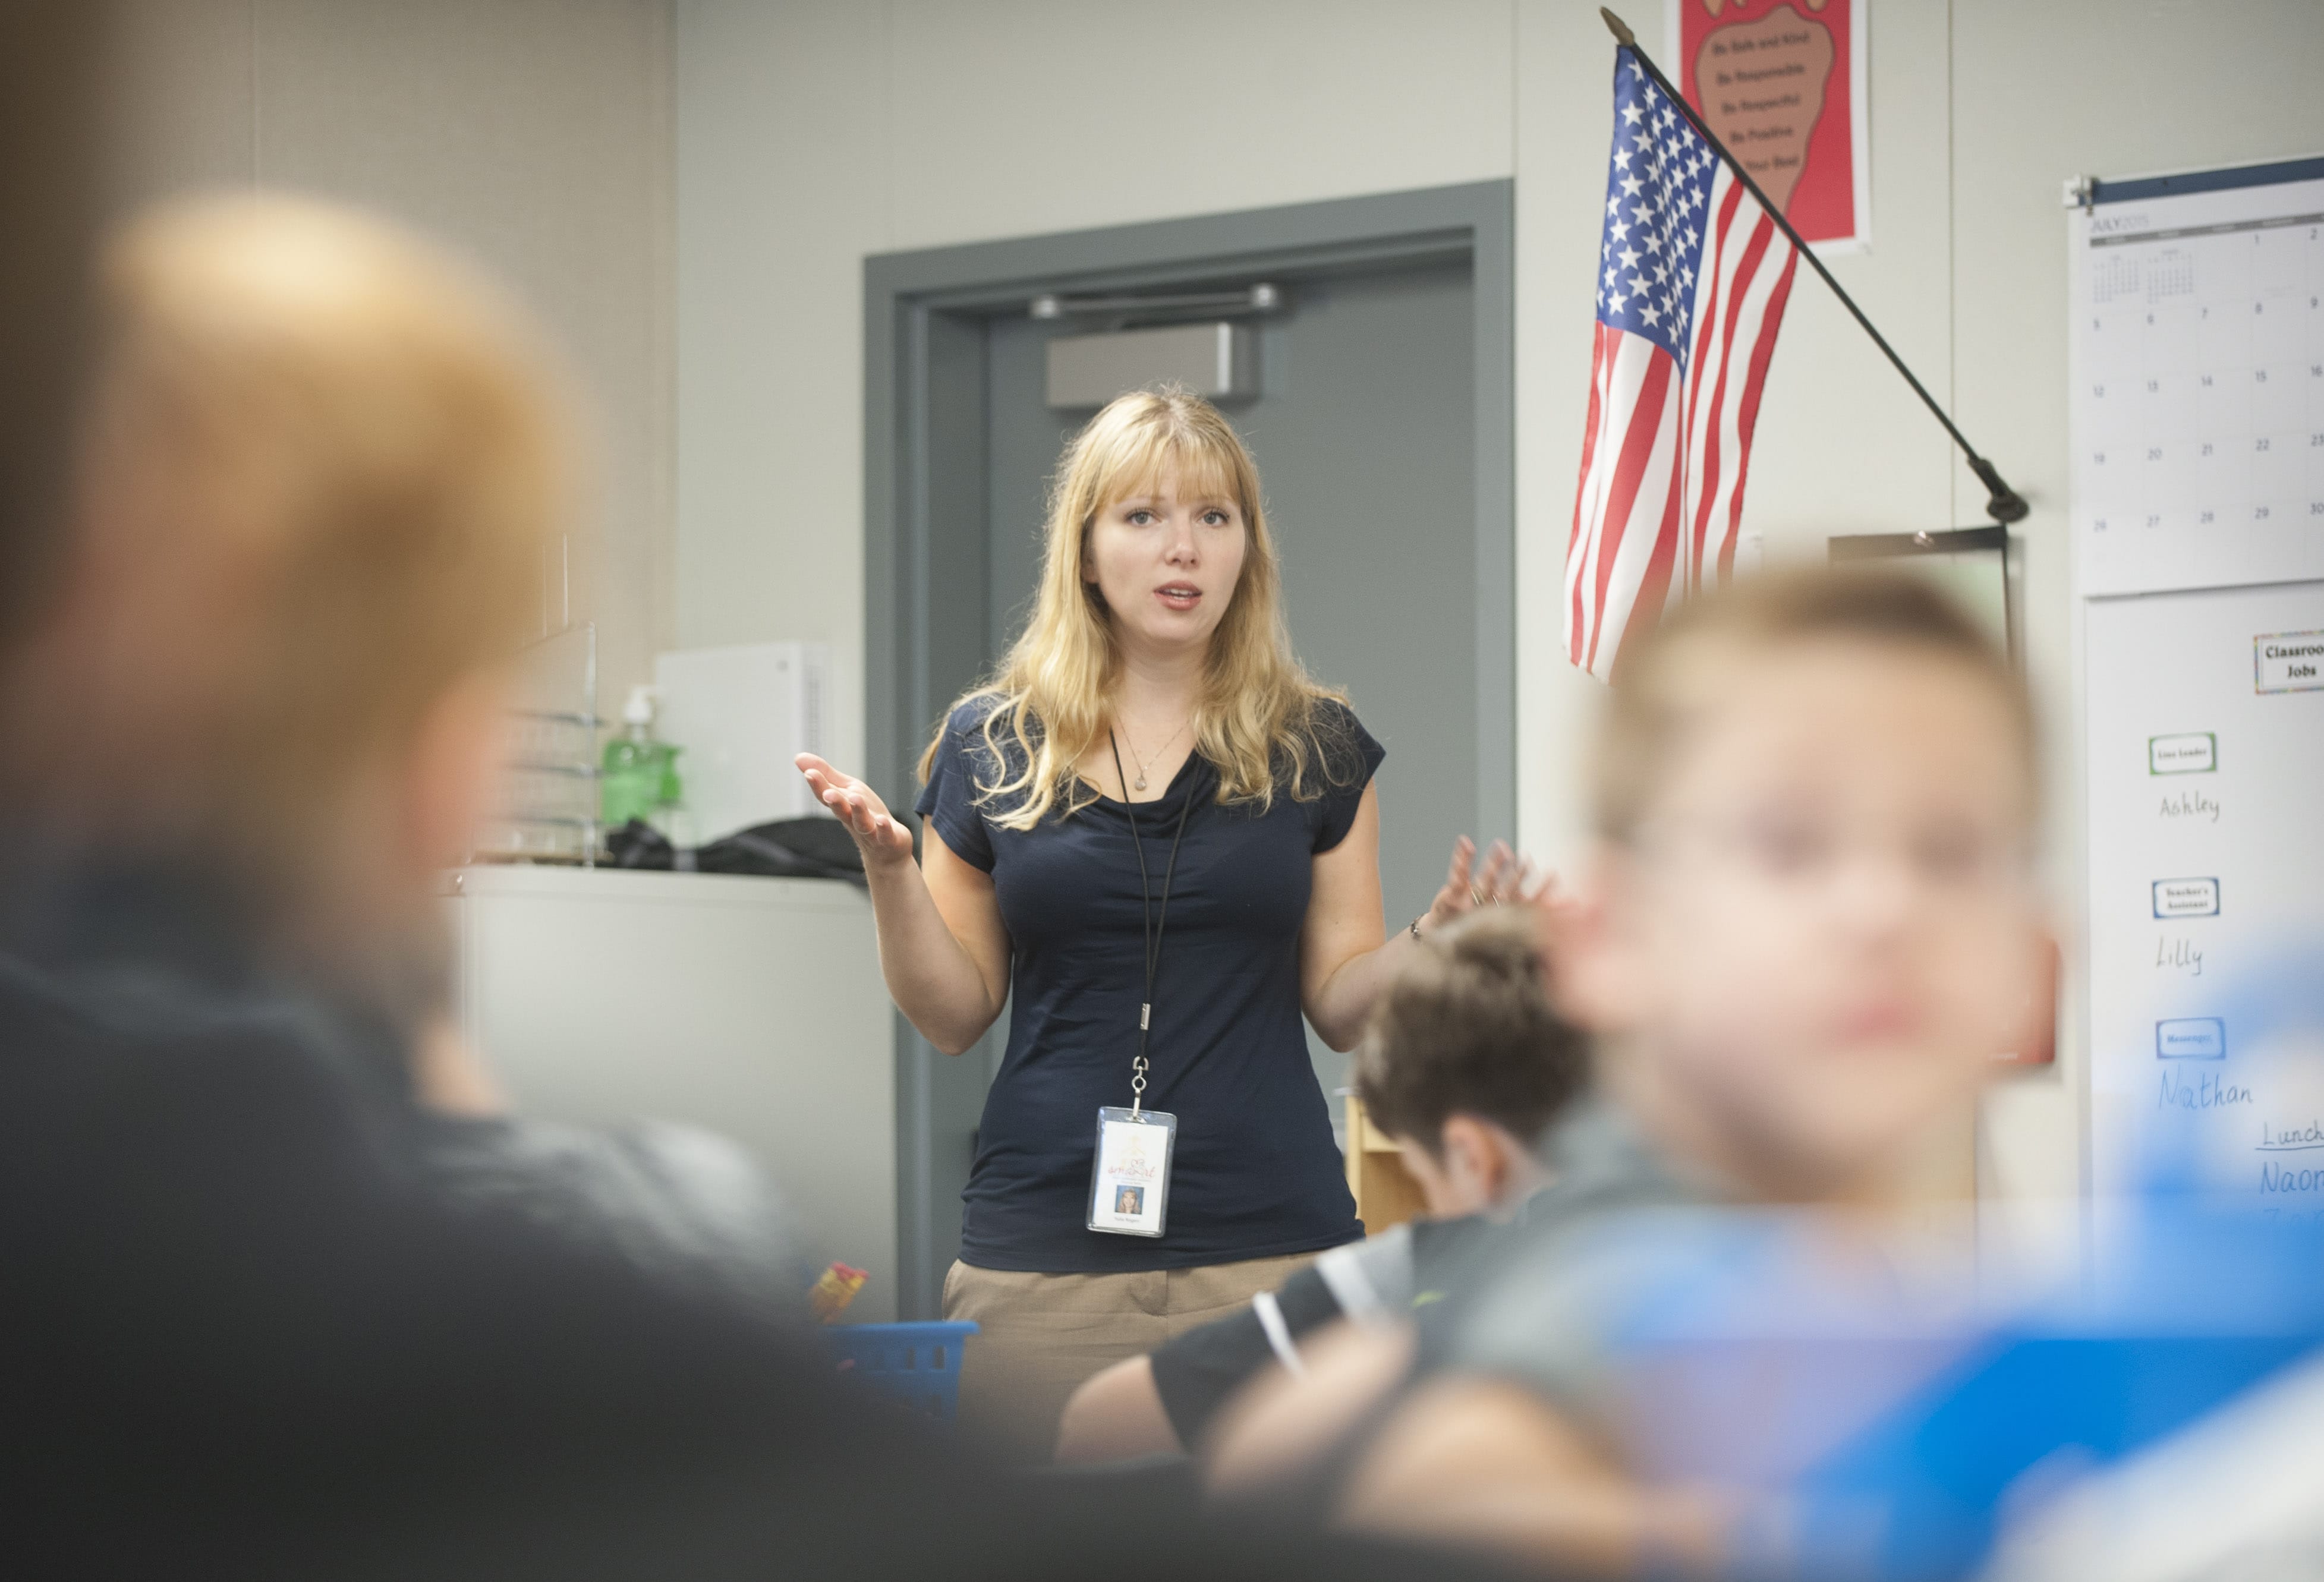 Yulia Rogers, a new fifth-grade teacher teacher at Endeavour Elementary gets to know her students on the first day of school in Vancouver Wednesday September 2, 2015.